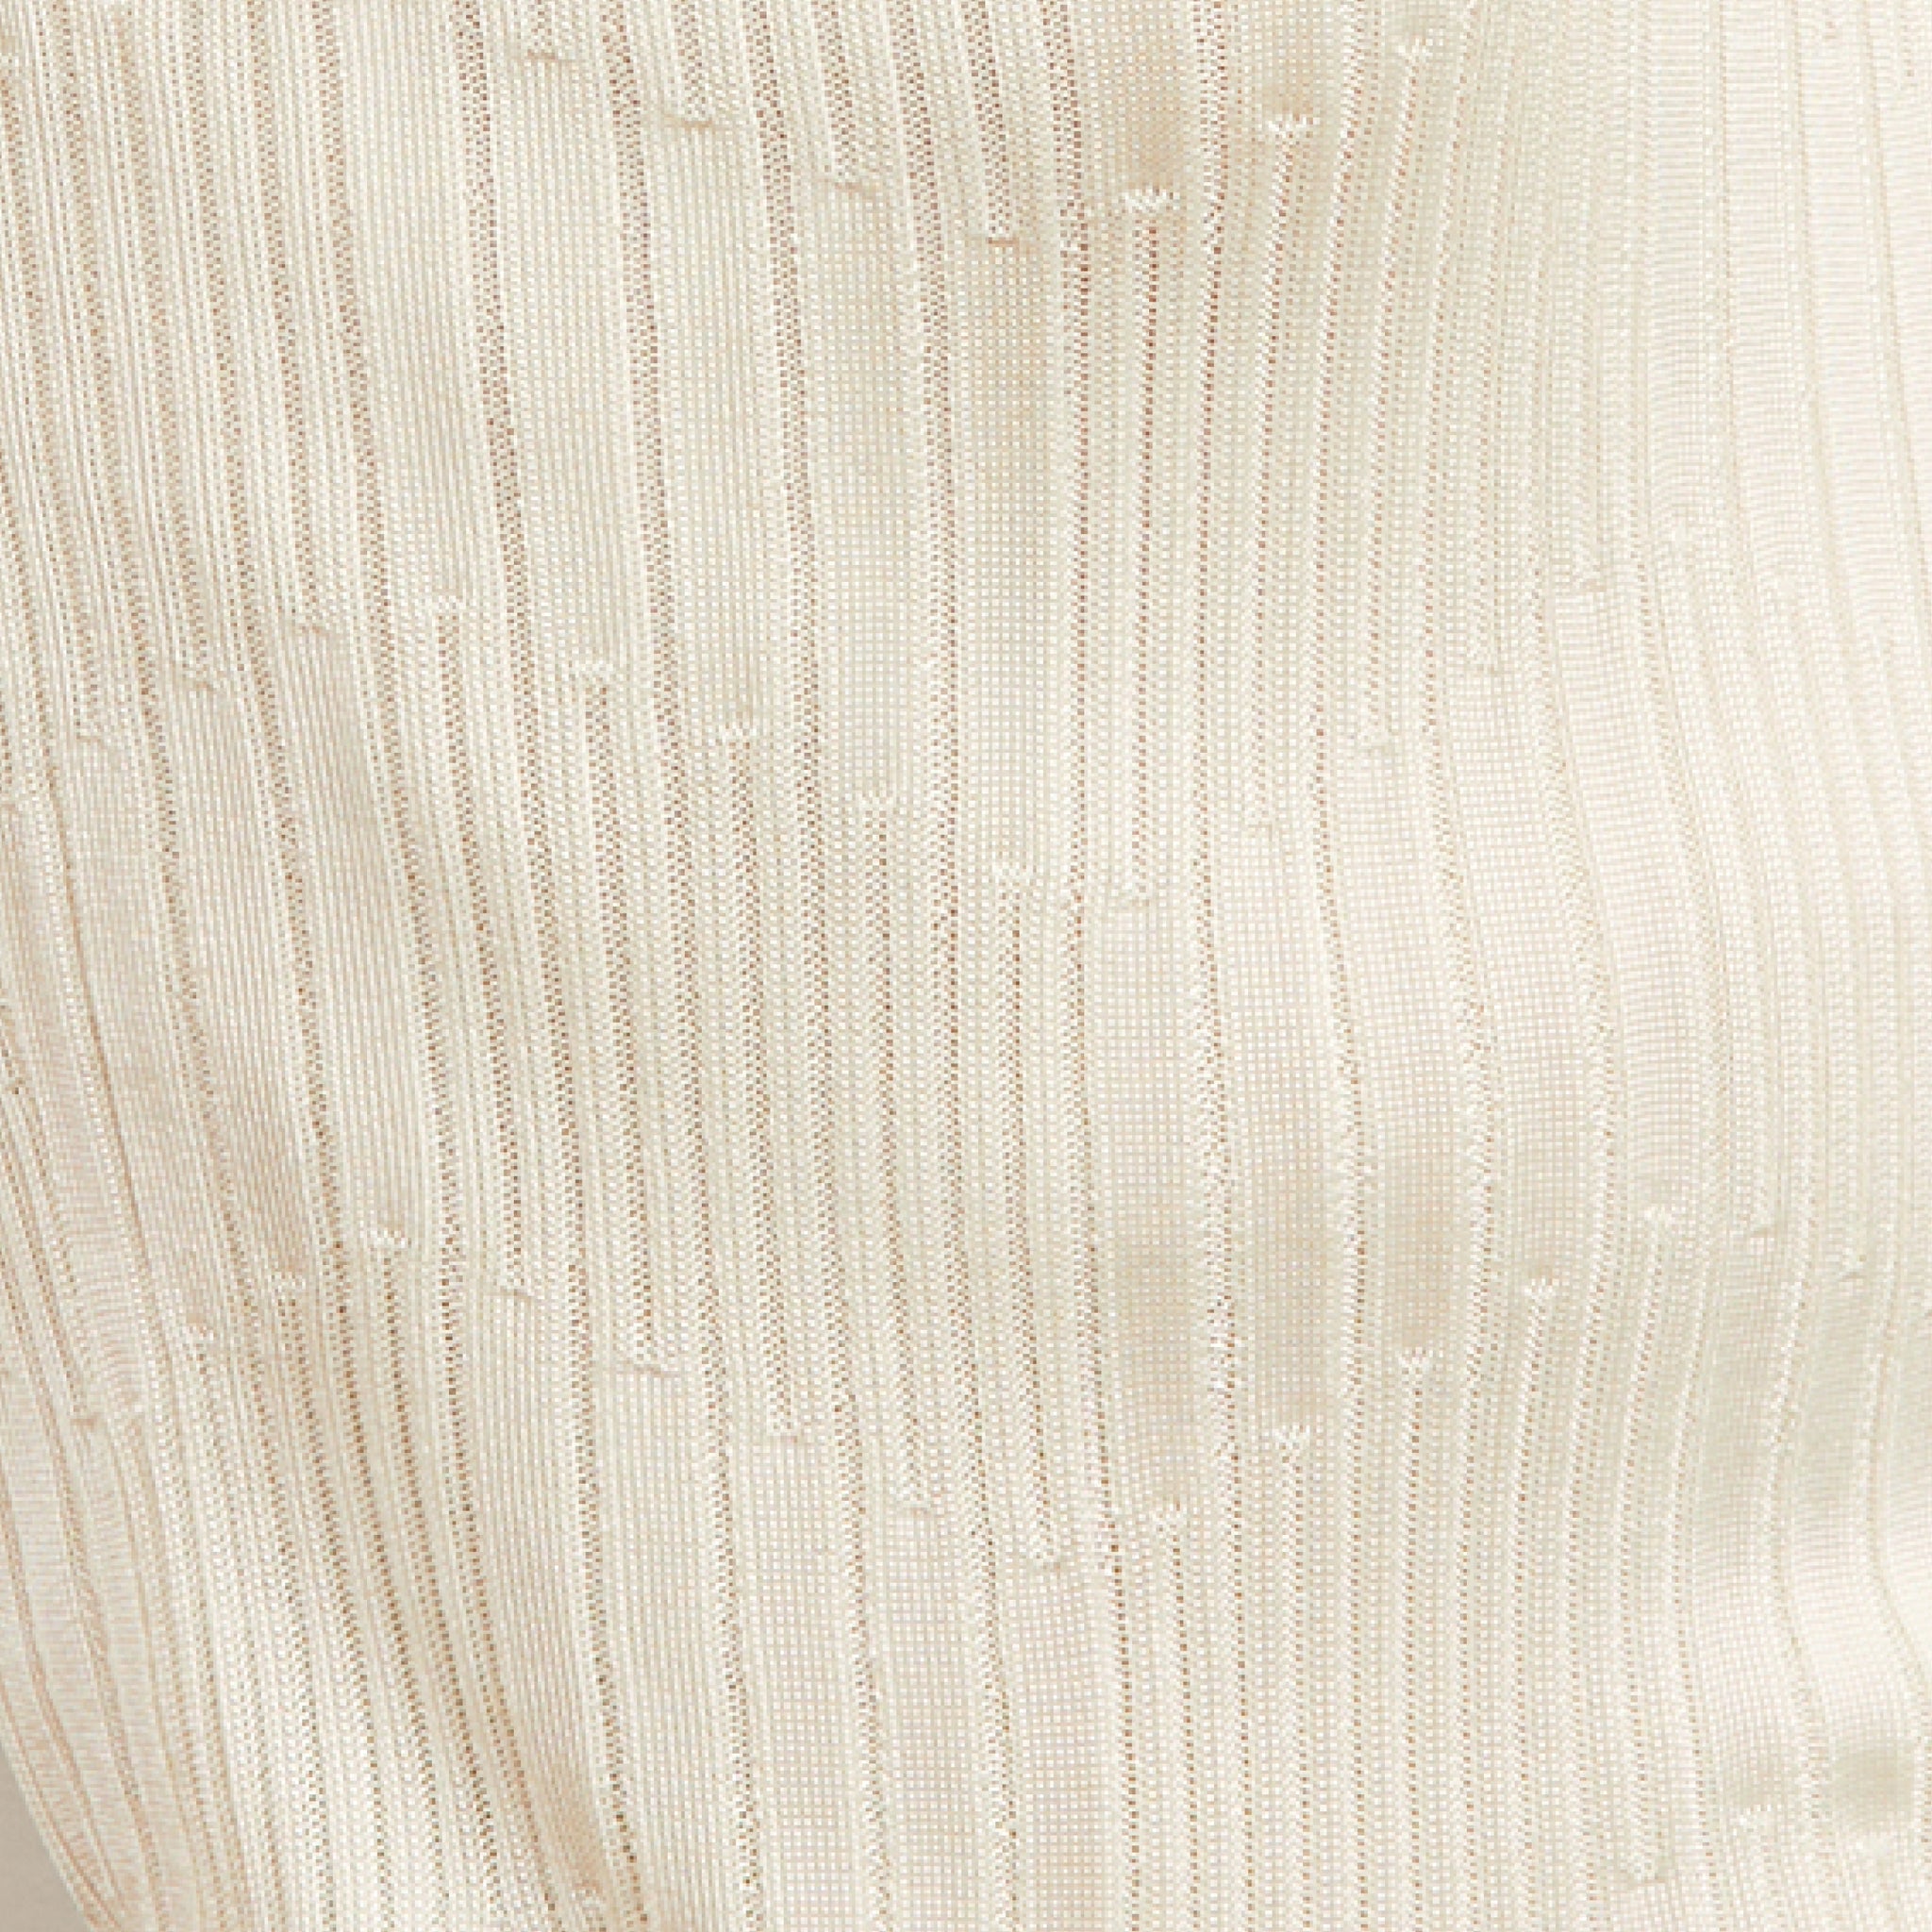 detail image of cascade knit fabric